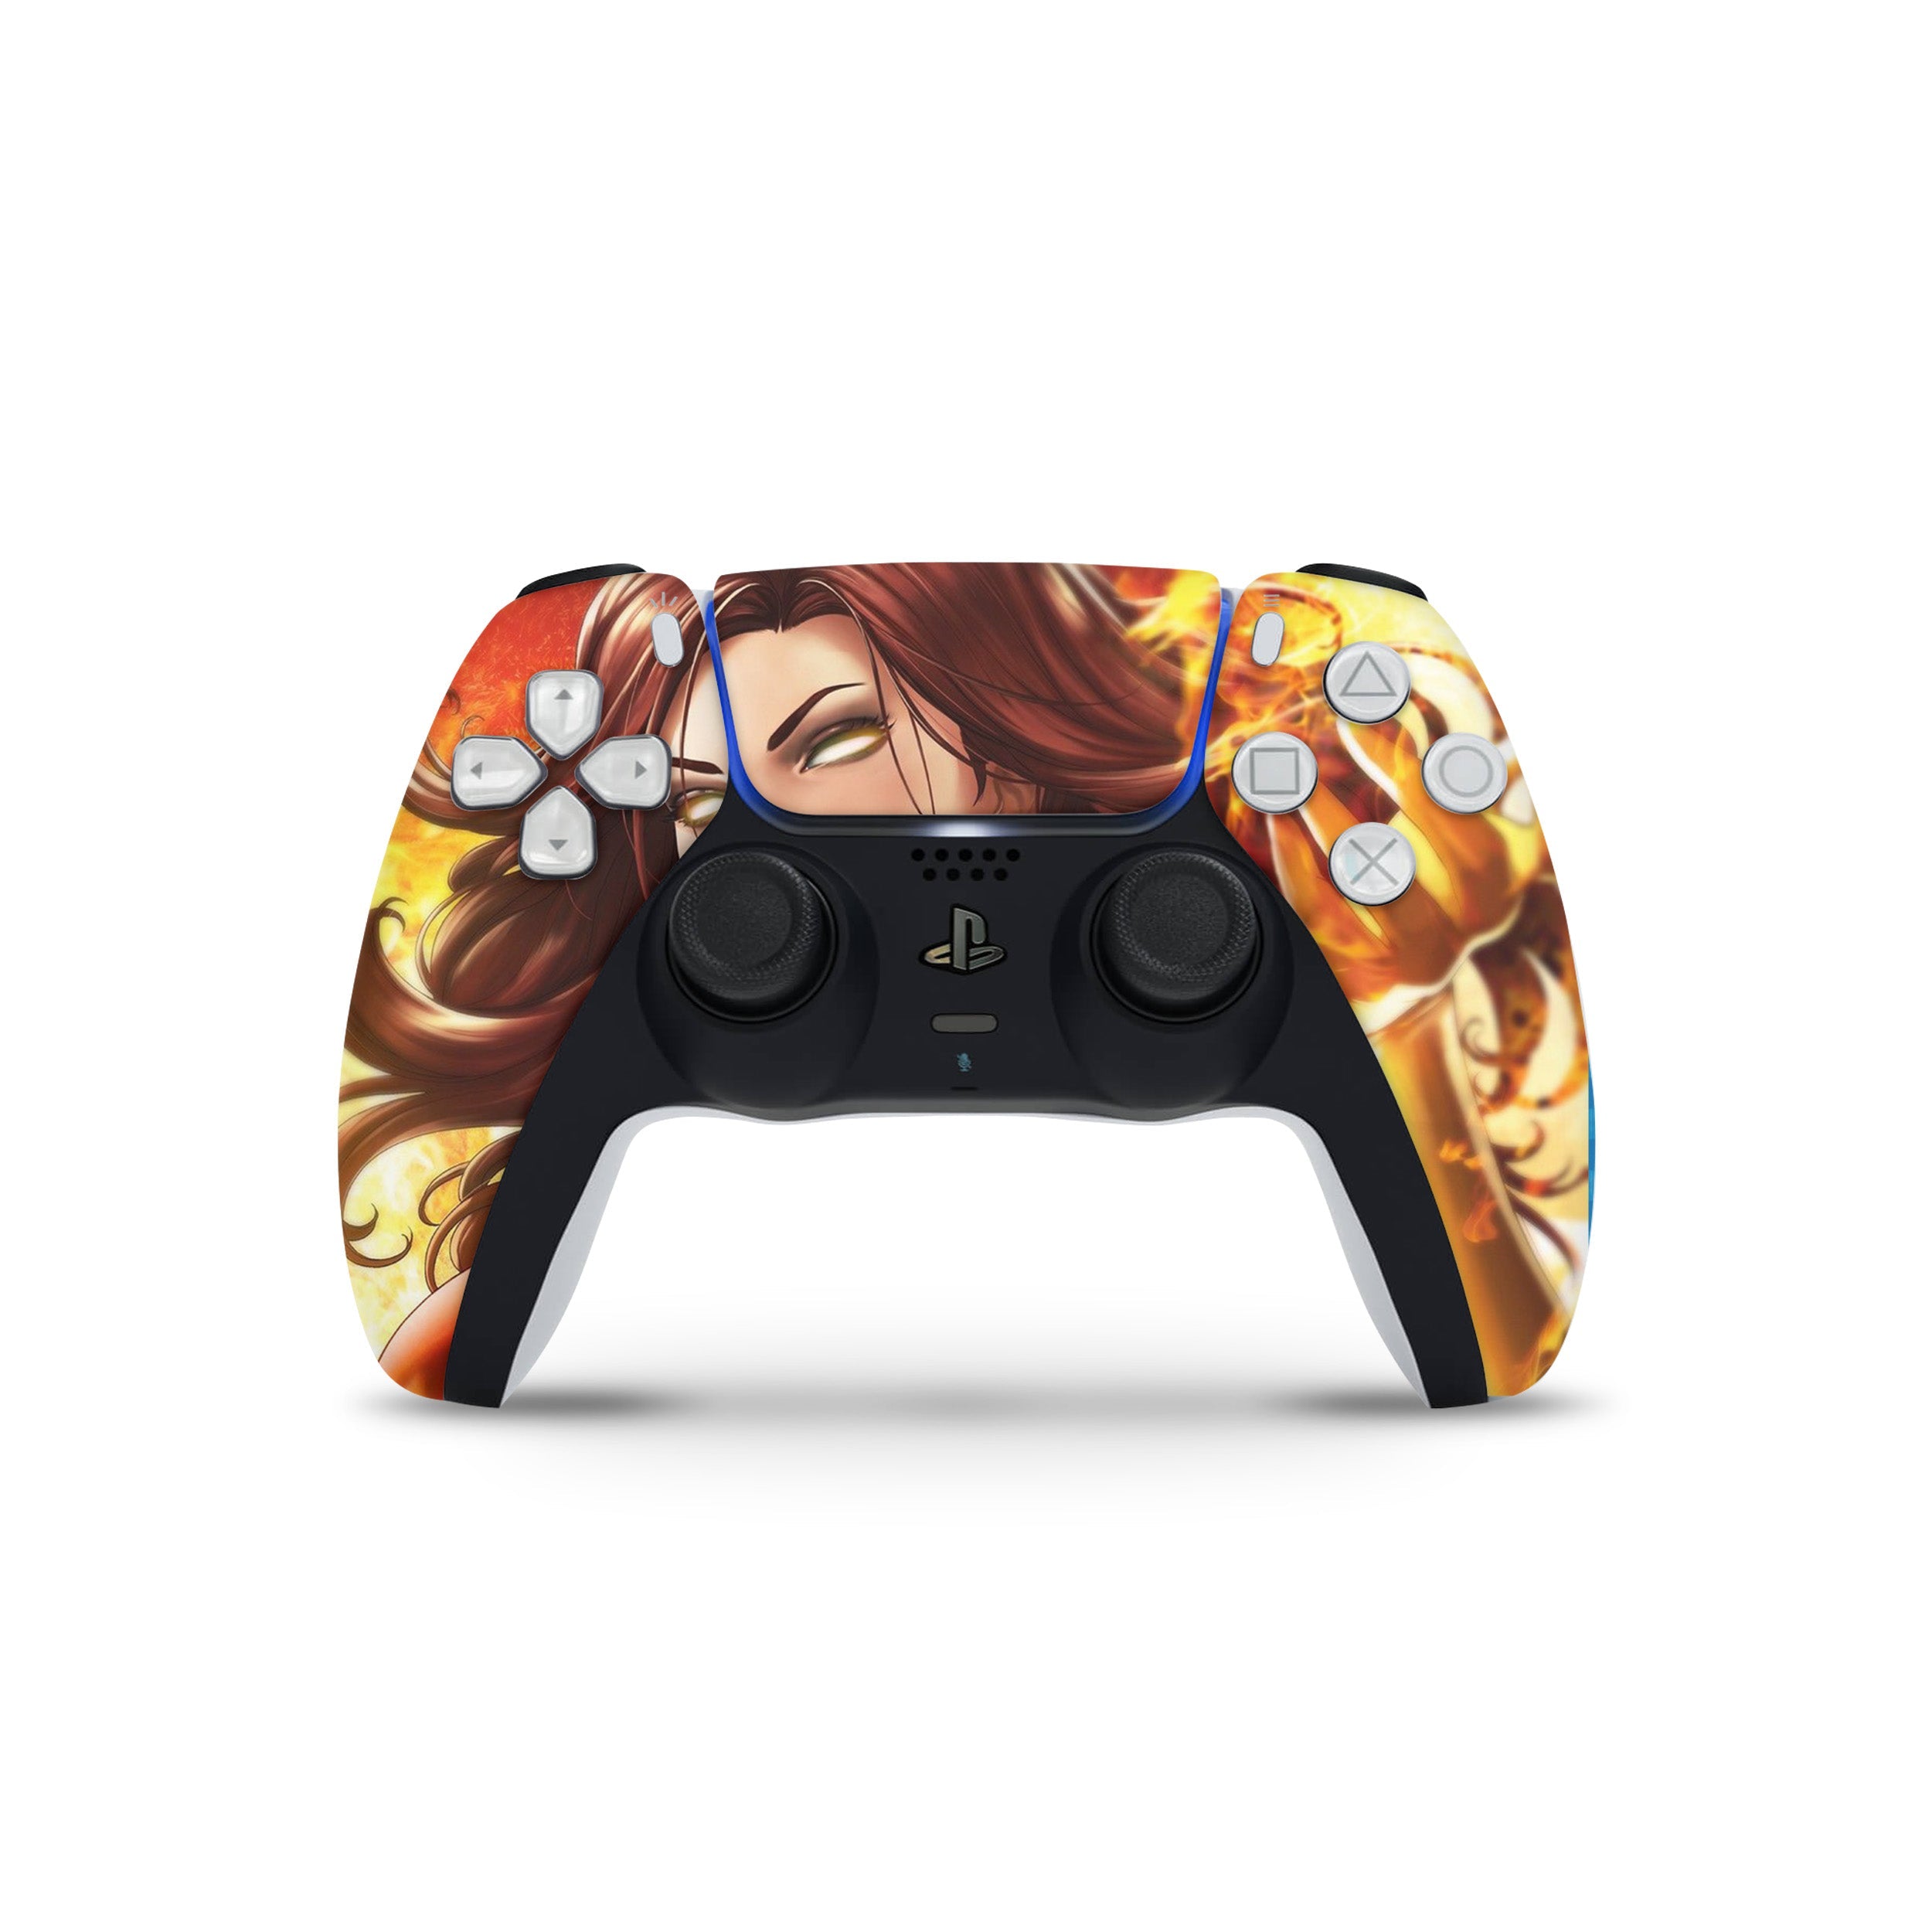 A video game skin featuring a Marvel X Men Phoenix design for the PS5 DualSense Controller.